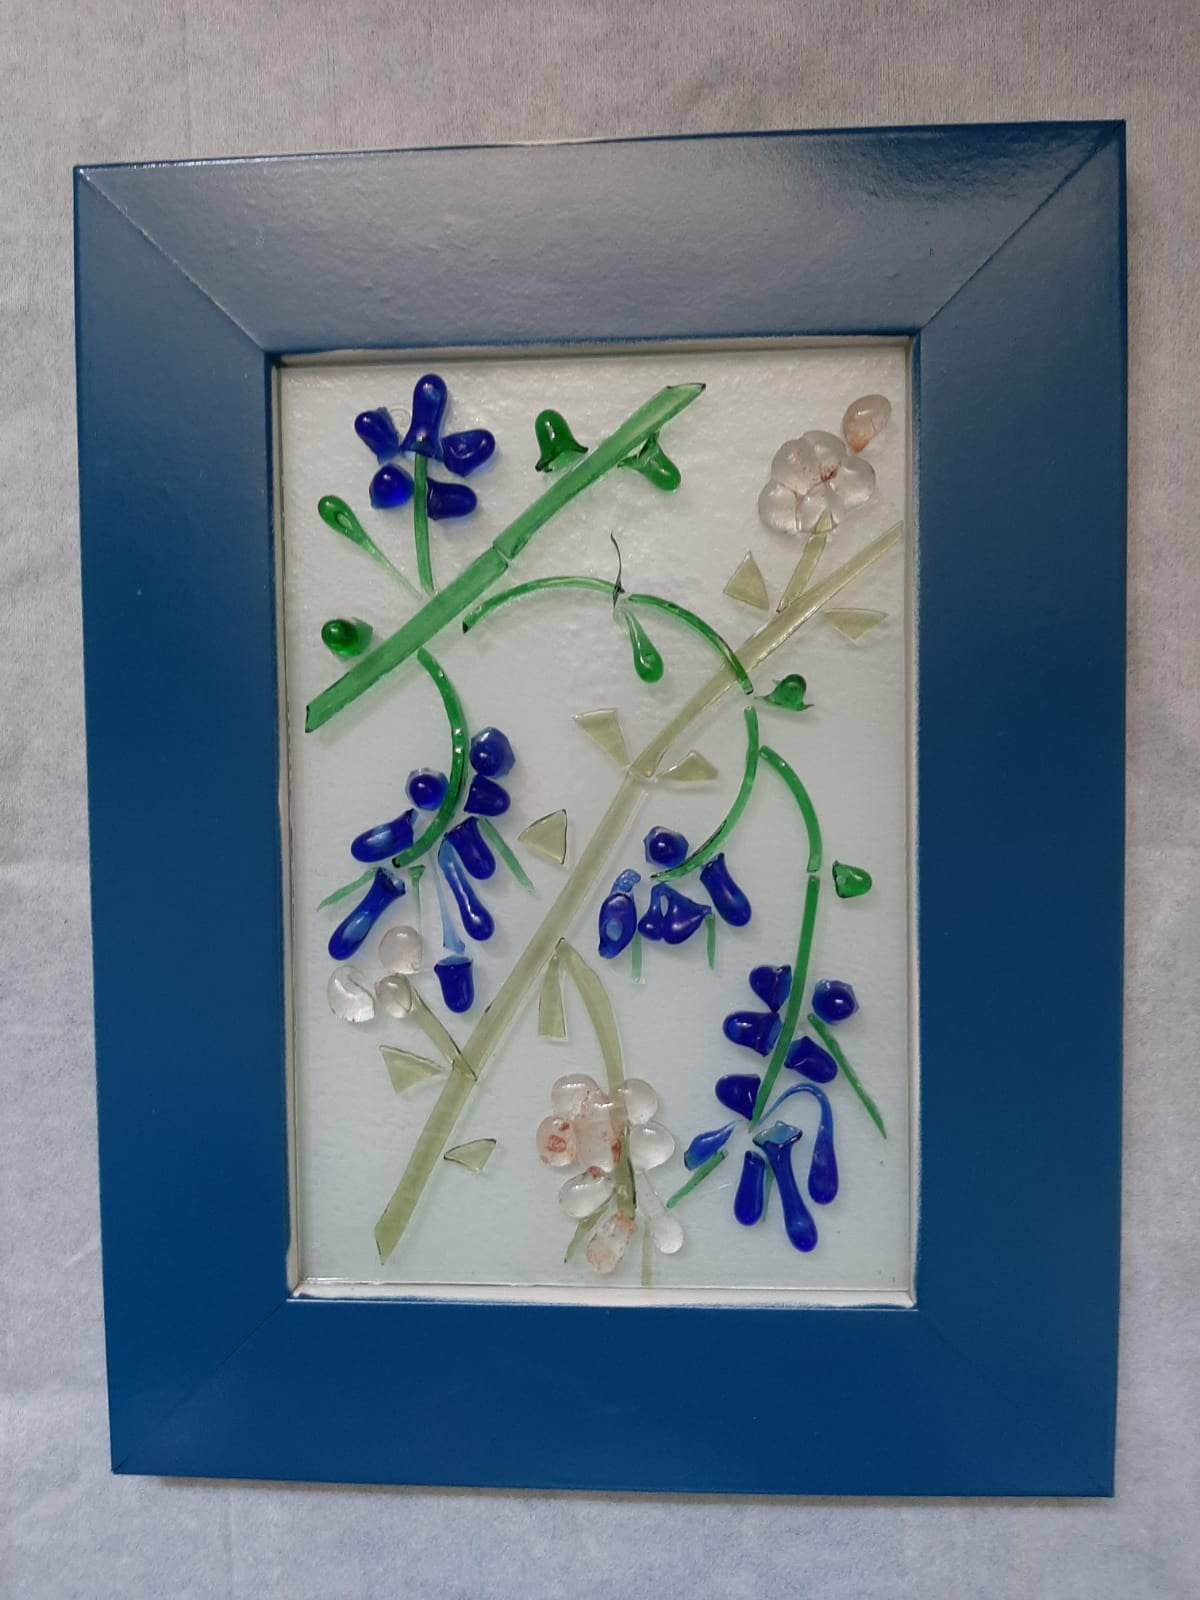 Adina Dolev, glass fusing, 37 by 28.5 cm, framed, (for hanging)